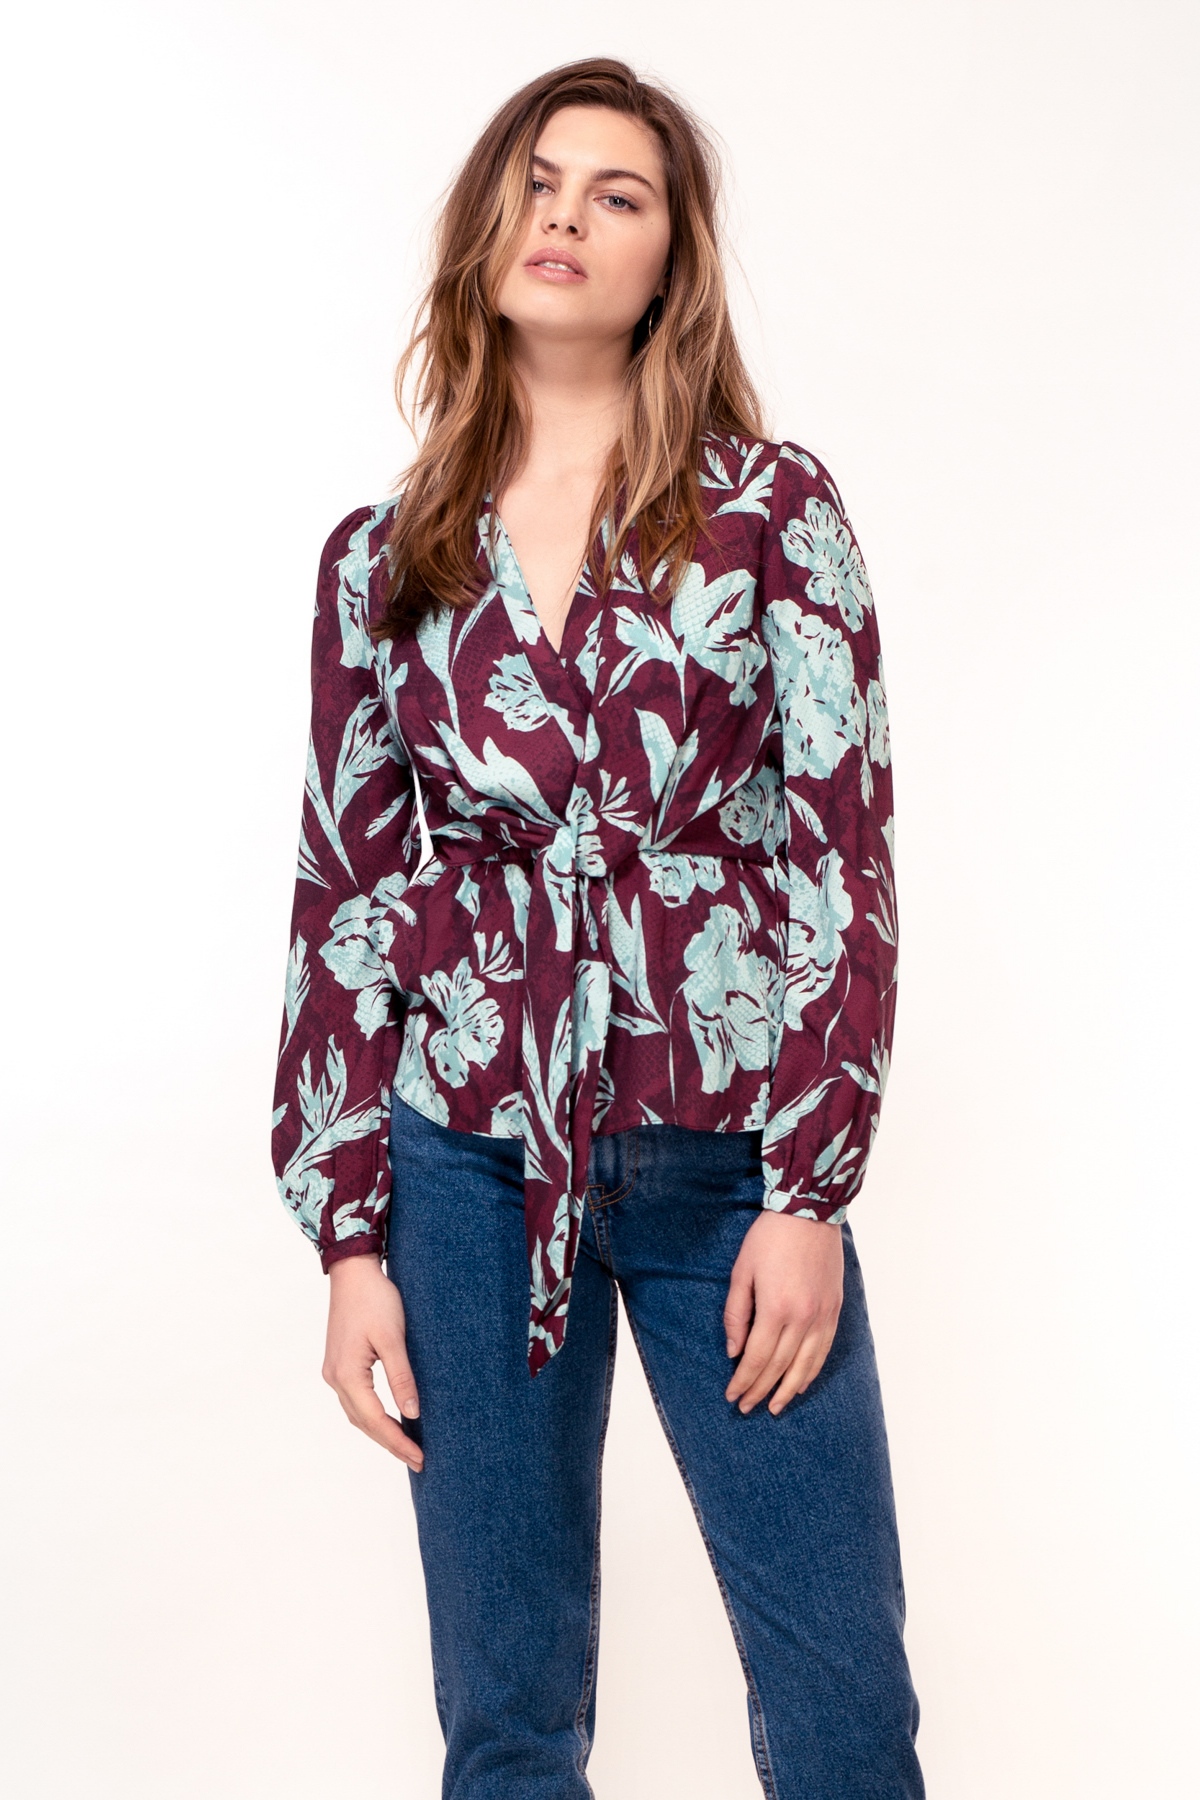 Hide the Label Nyssa Tie Front Top in Purple Snake Print, available at ZERRIN